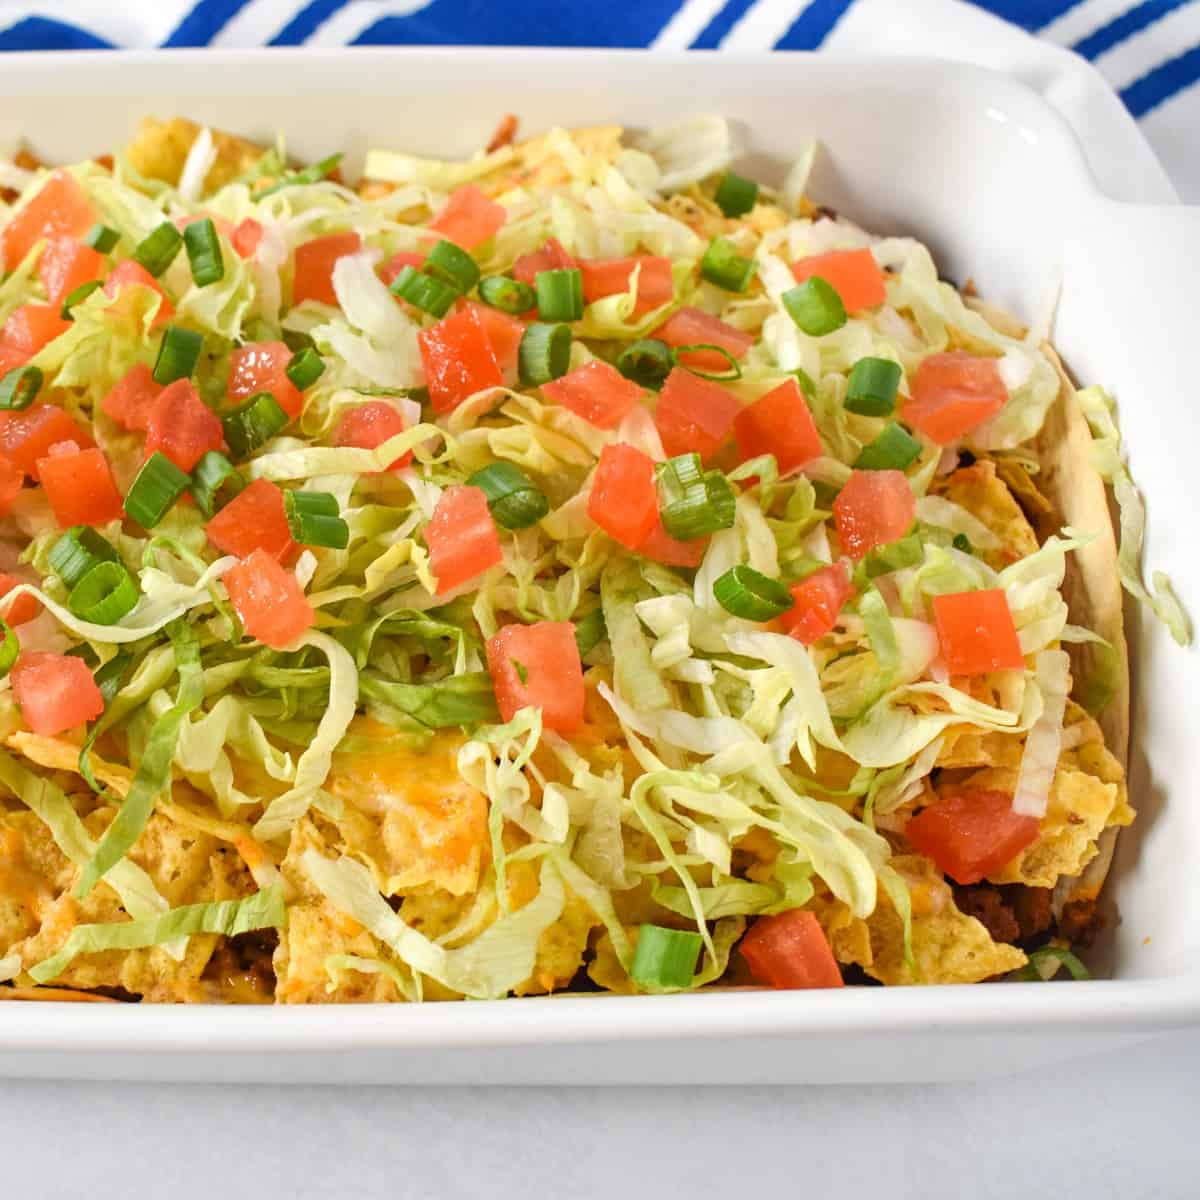 The taco casserole in a white baking dish.